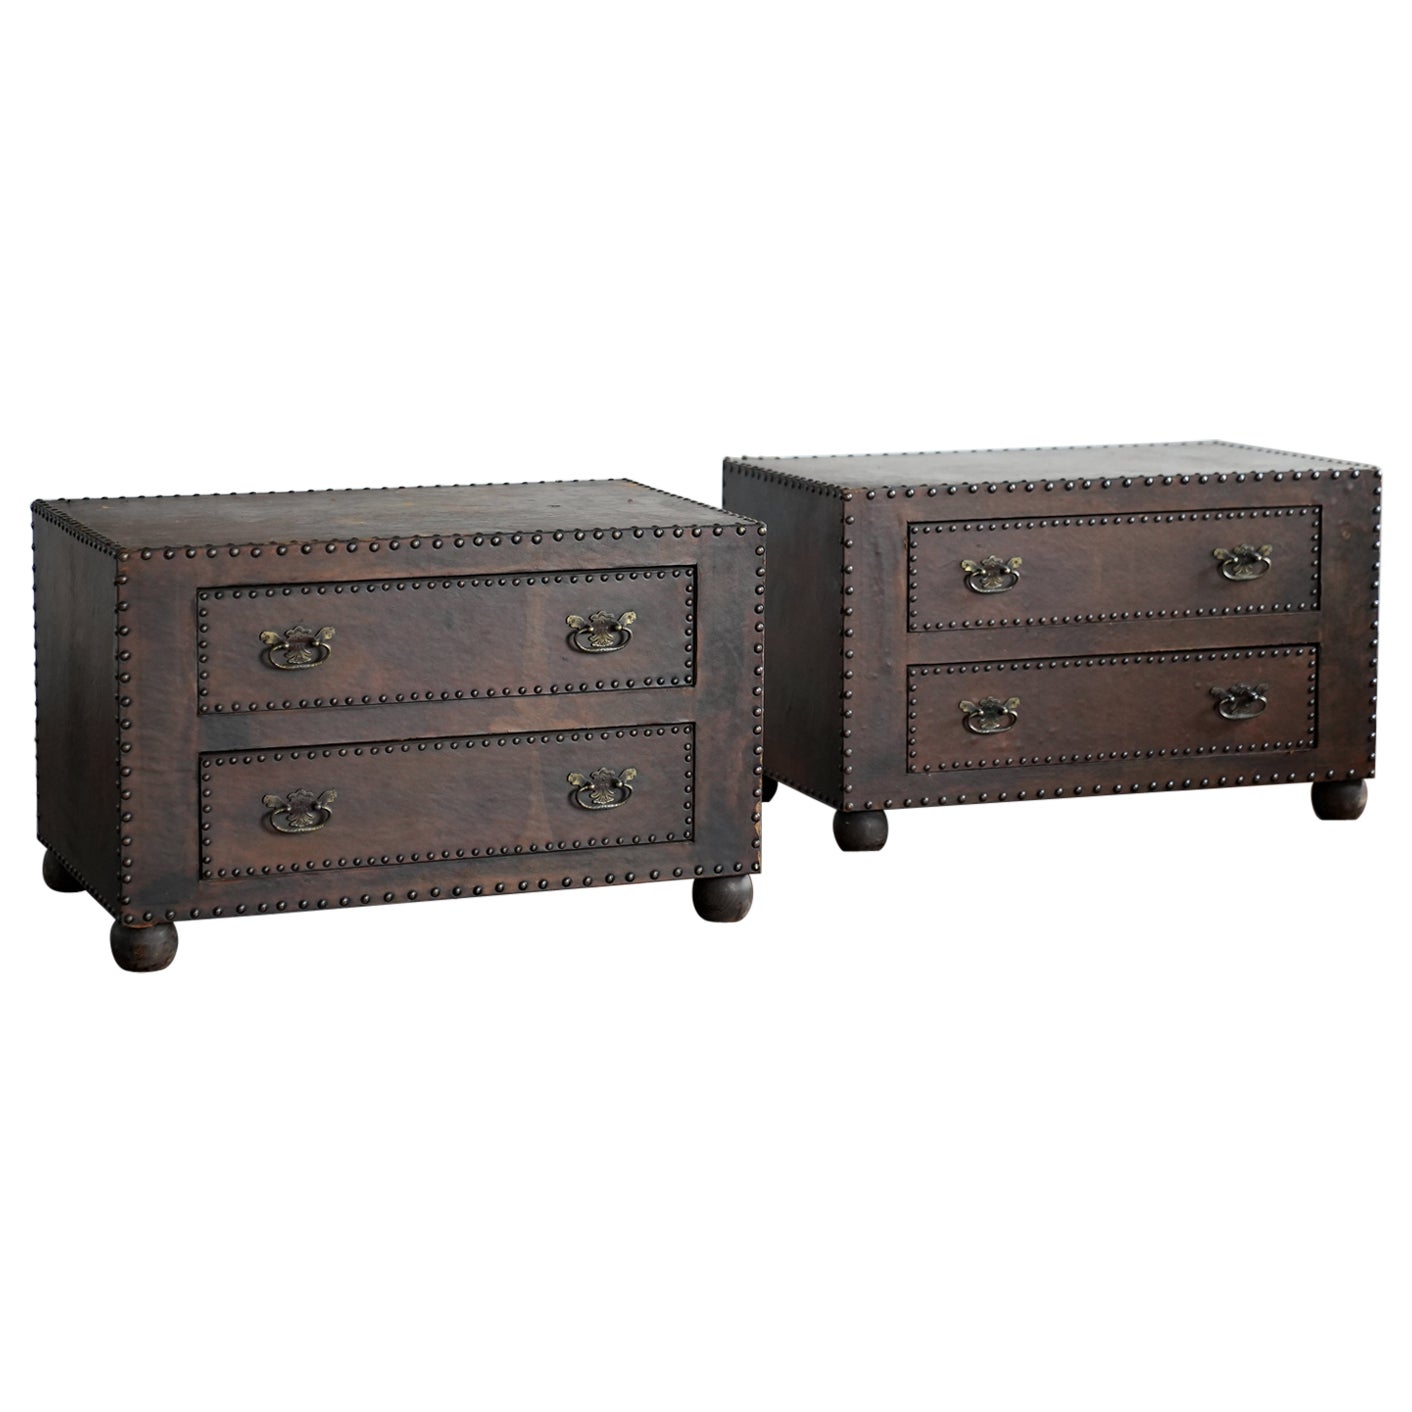 Studded leather clad chests